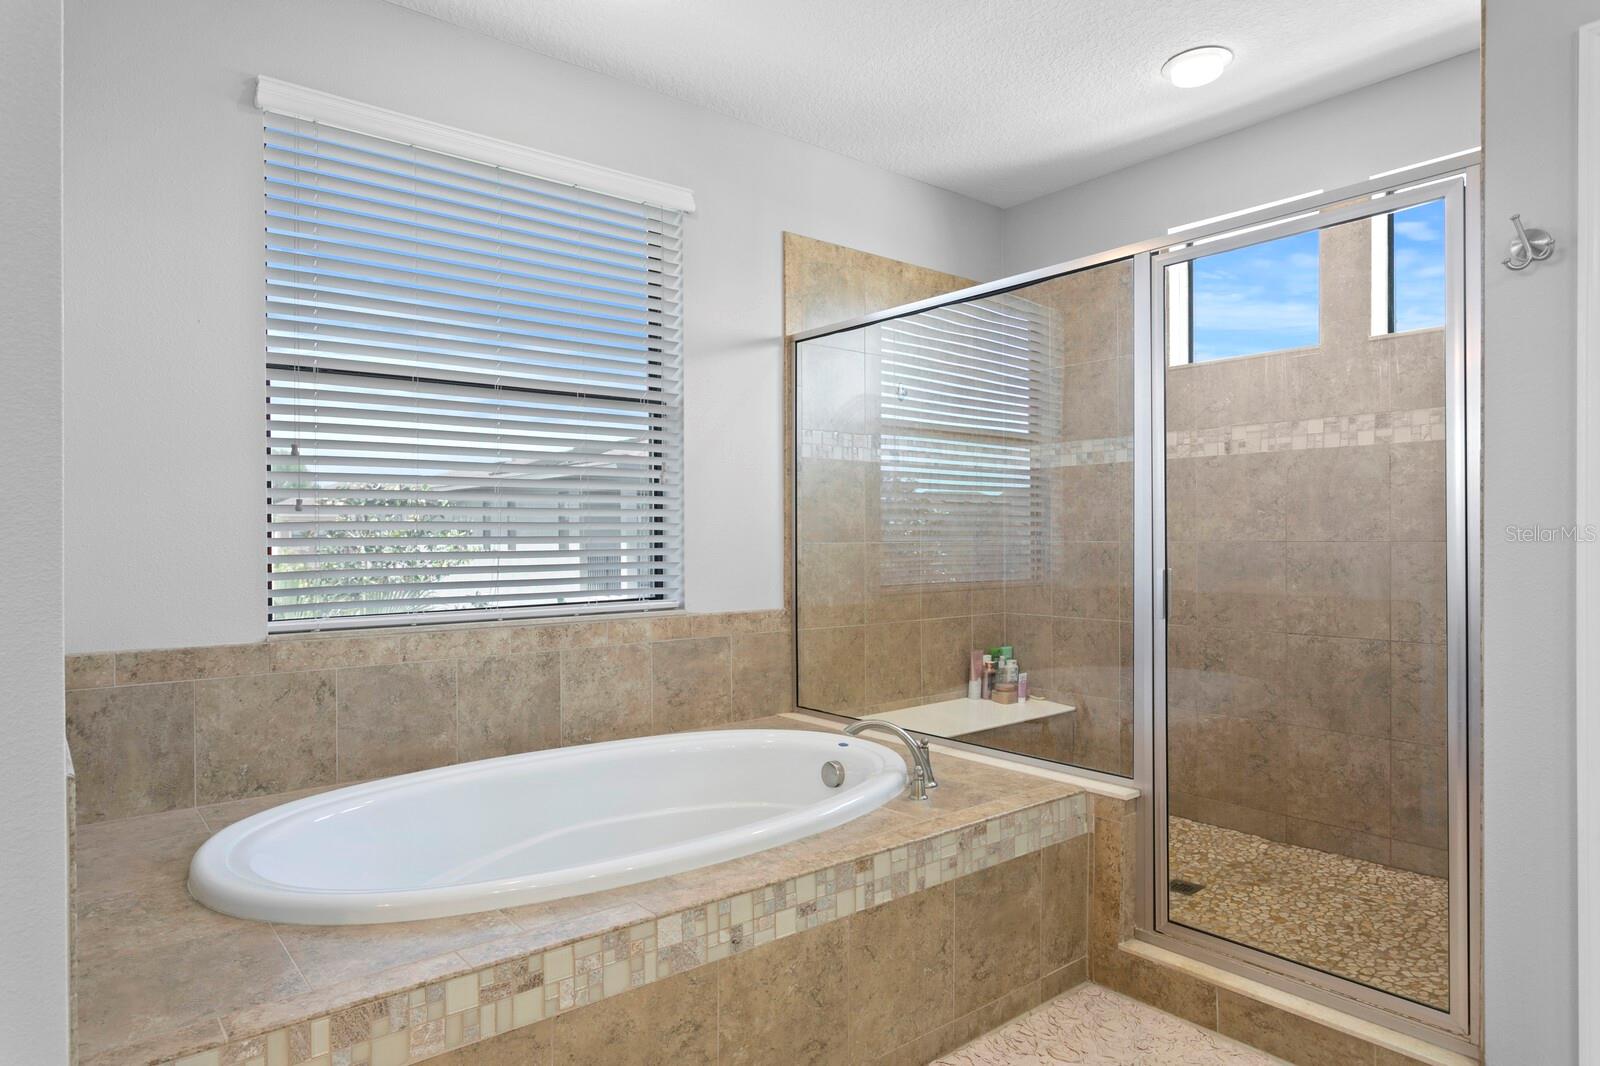 Soak in the tub or grab a shower to start the day!